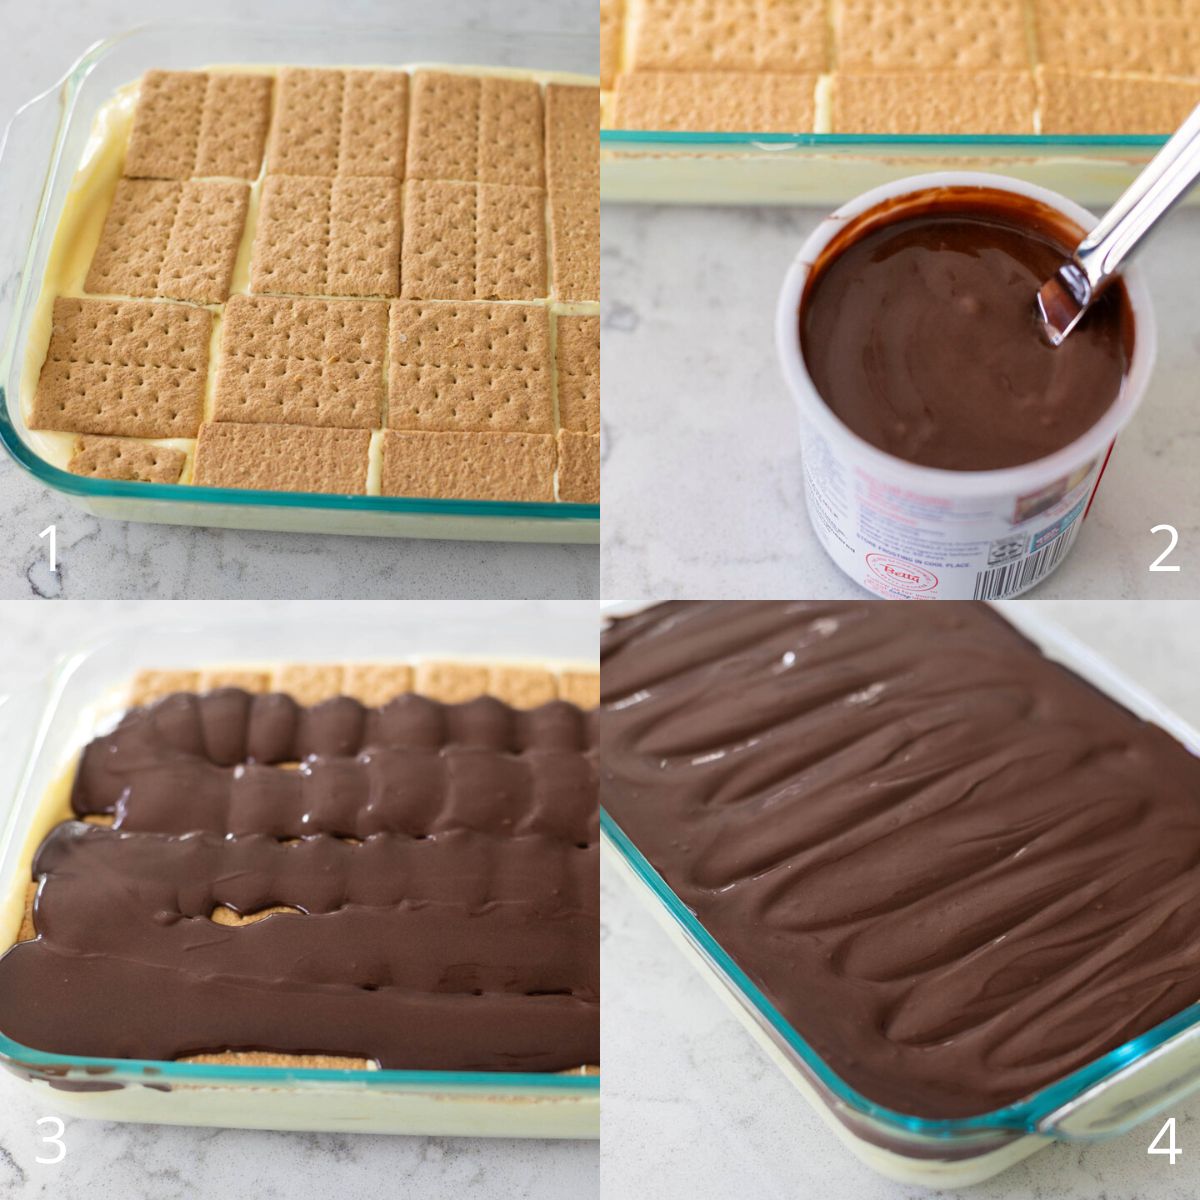 The step by step photos show how to frost the torte with chocolate frosting.